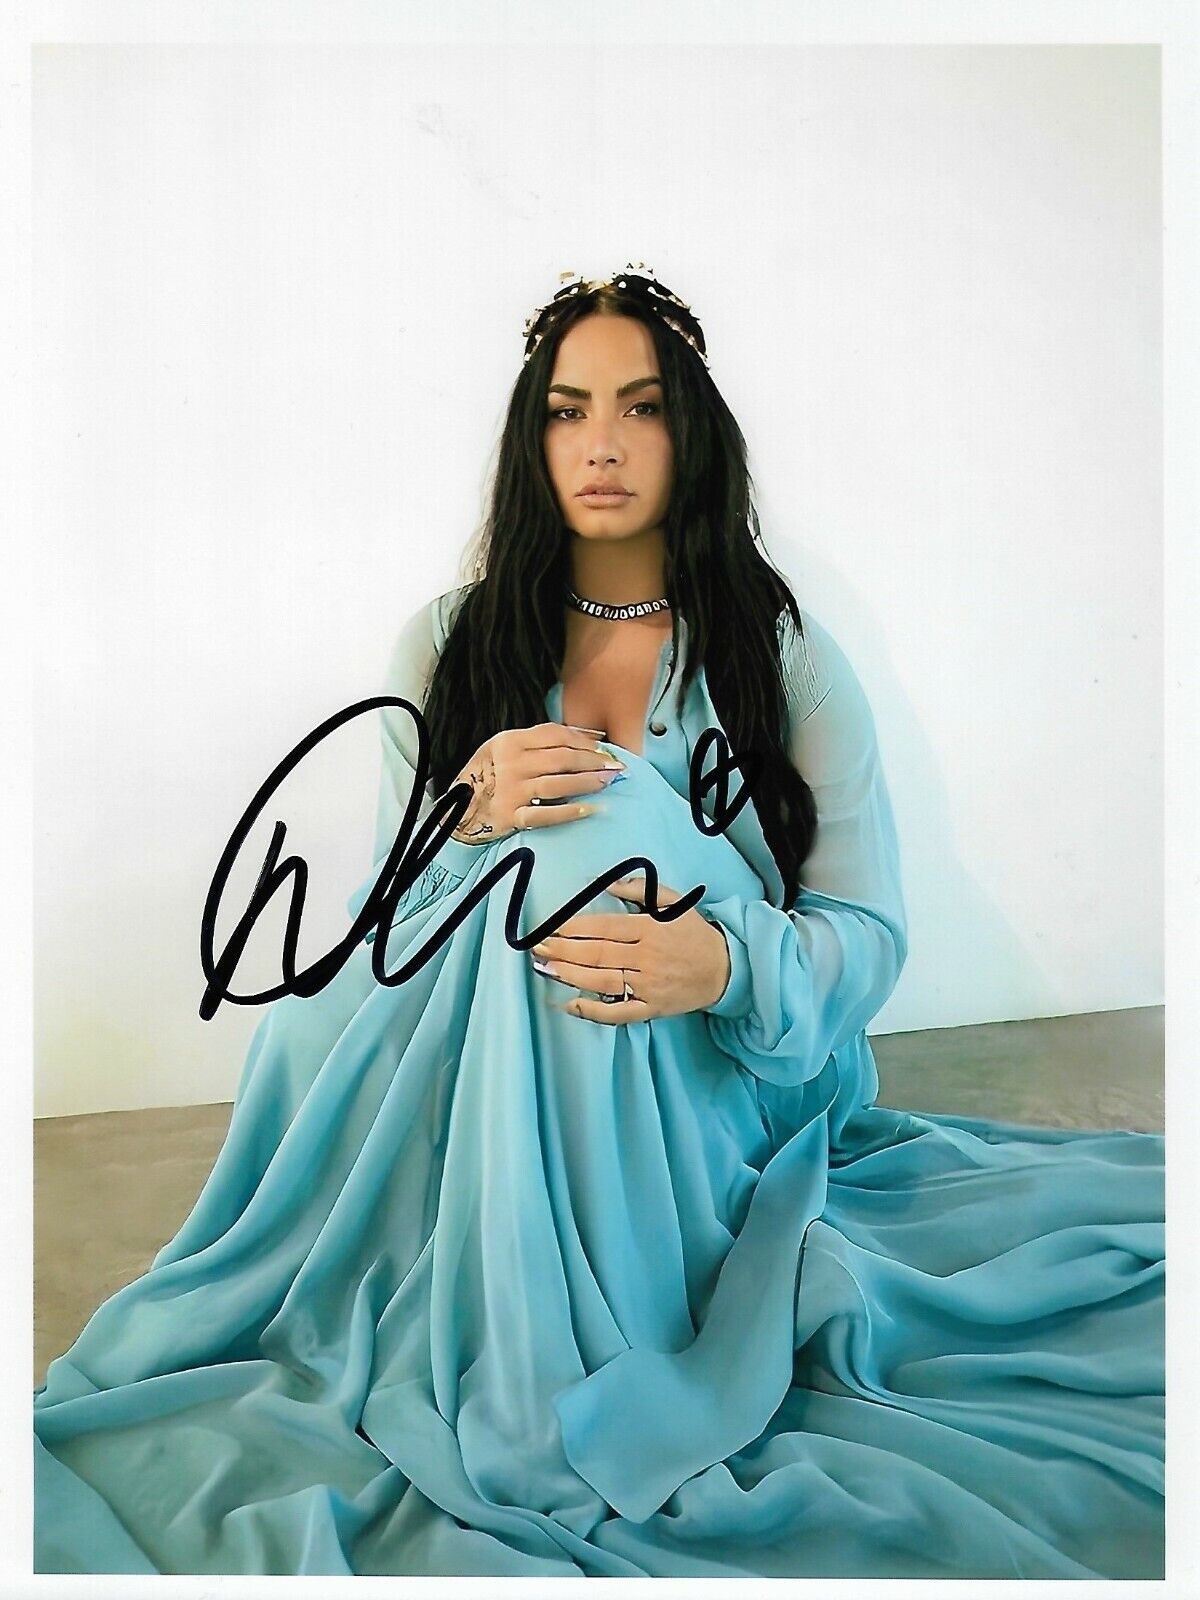 Demi Lovato Signed Autographed 8x10 Photo Poster painting incl. COA